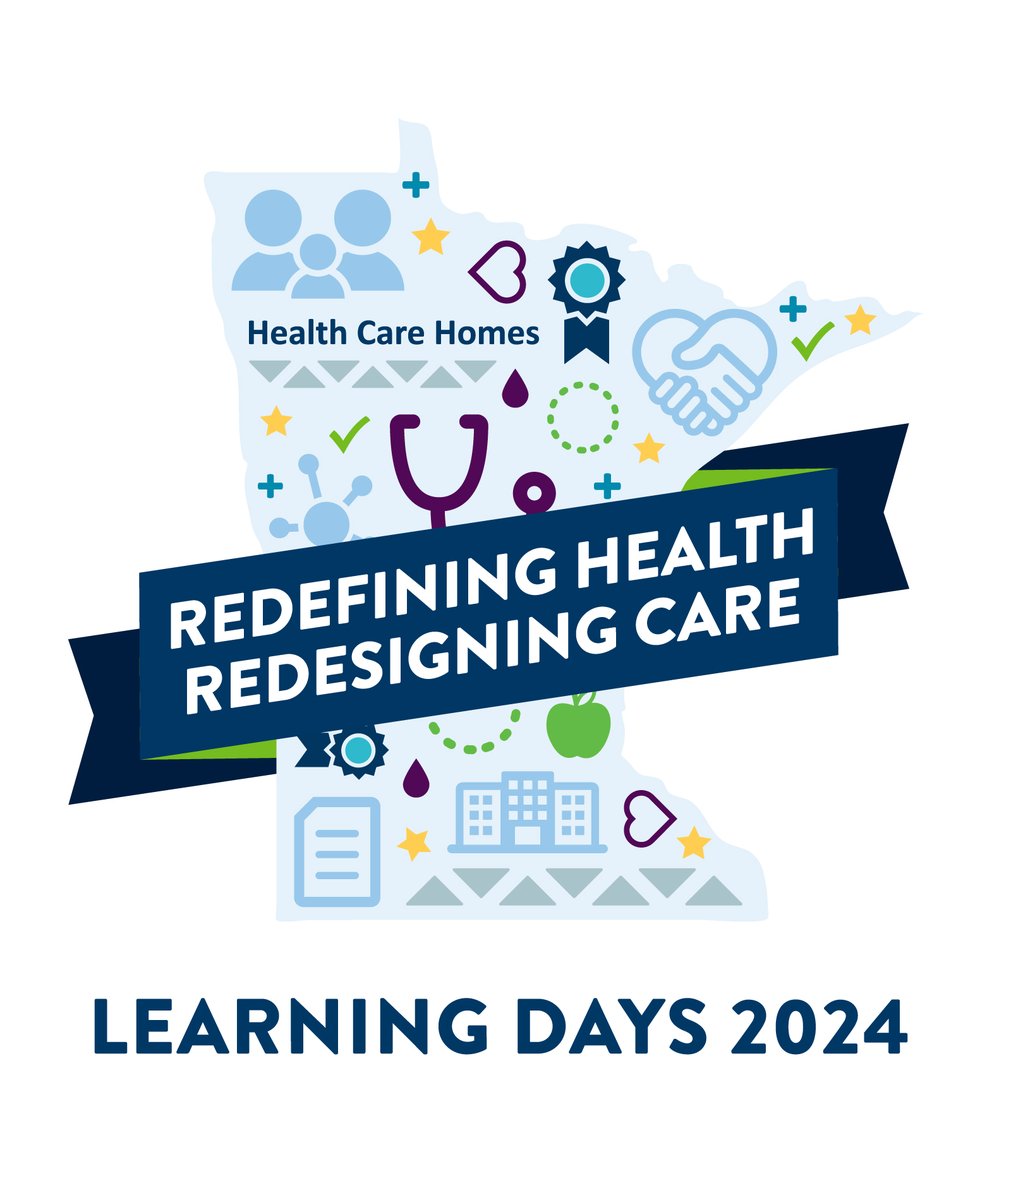 Attend #MNHealthCareHomes Learning Days in St. Cloud May 16! Explore the rural-urban interdependence framework with Ellen Wolter, UofM, followed by a panel featuring Riverwood Healthcare Center, Red Lake Indian Health Service, and @UMNFamilyMed providers. bit.ly/4auwlqq